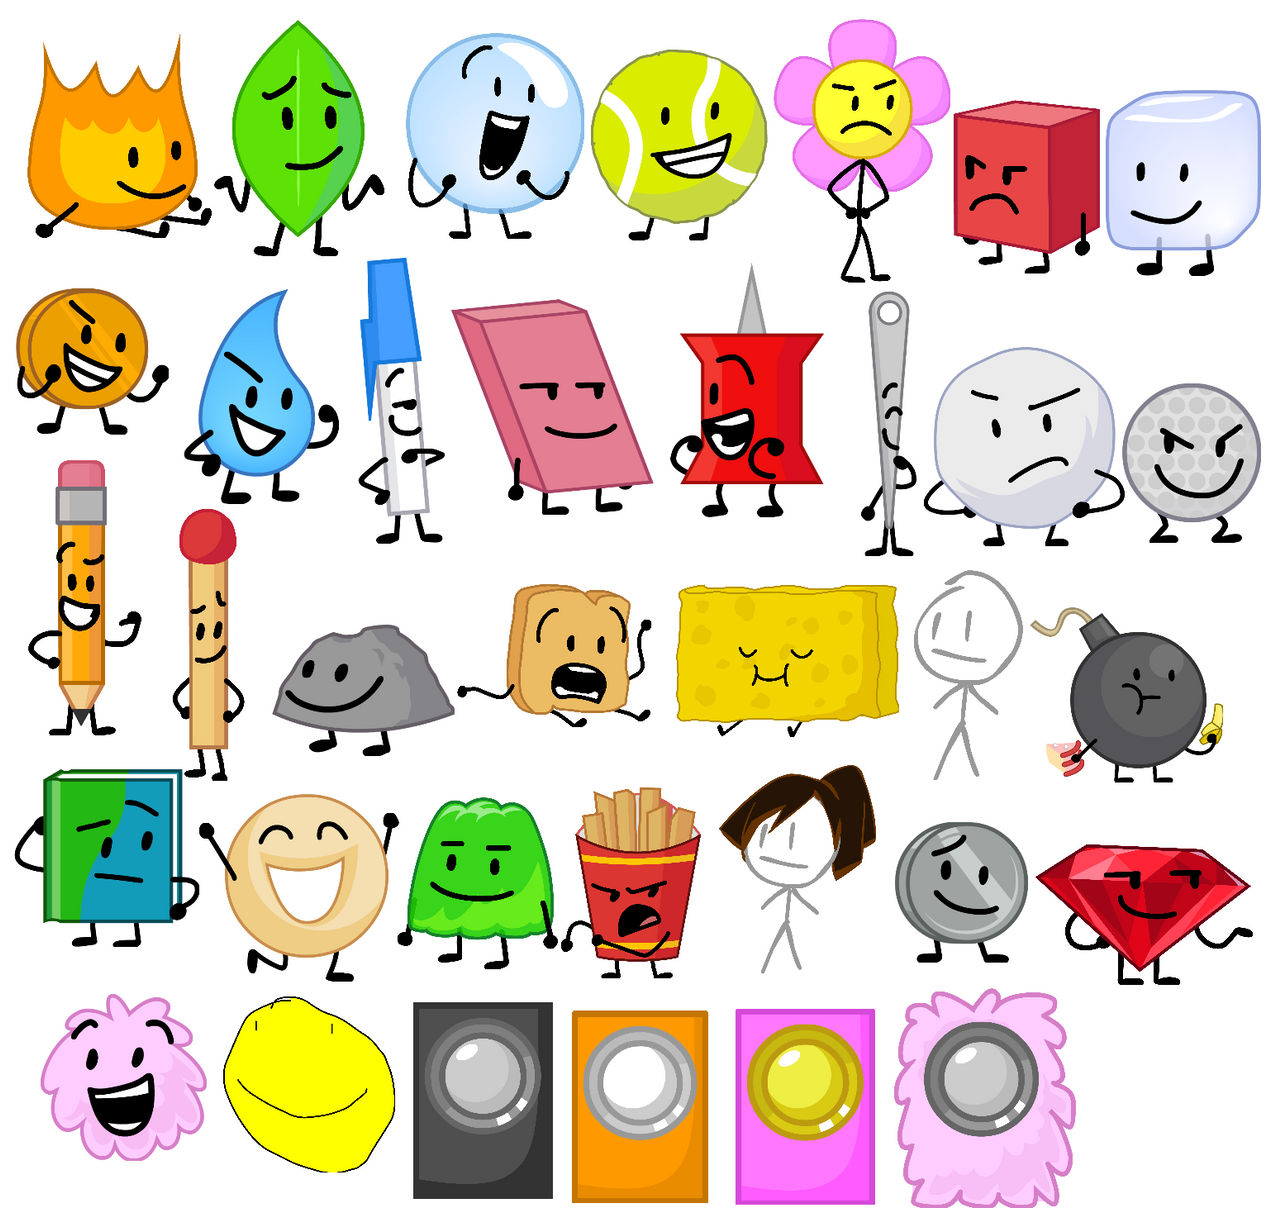 Battle for Dream Island - BFDI characters + Content-Aware Fill.